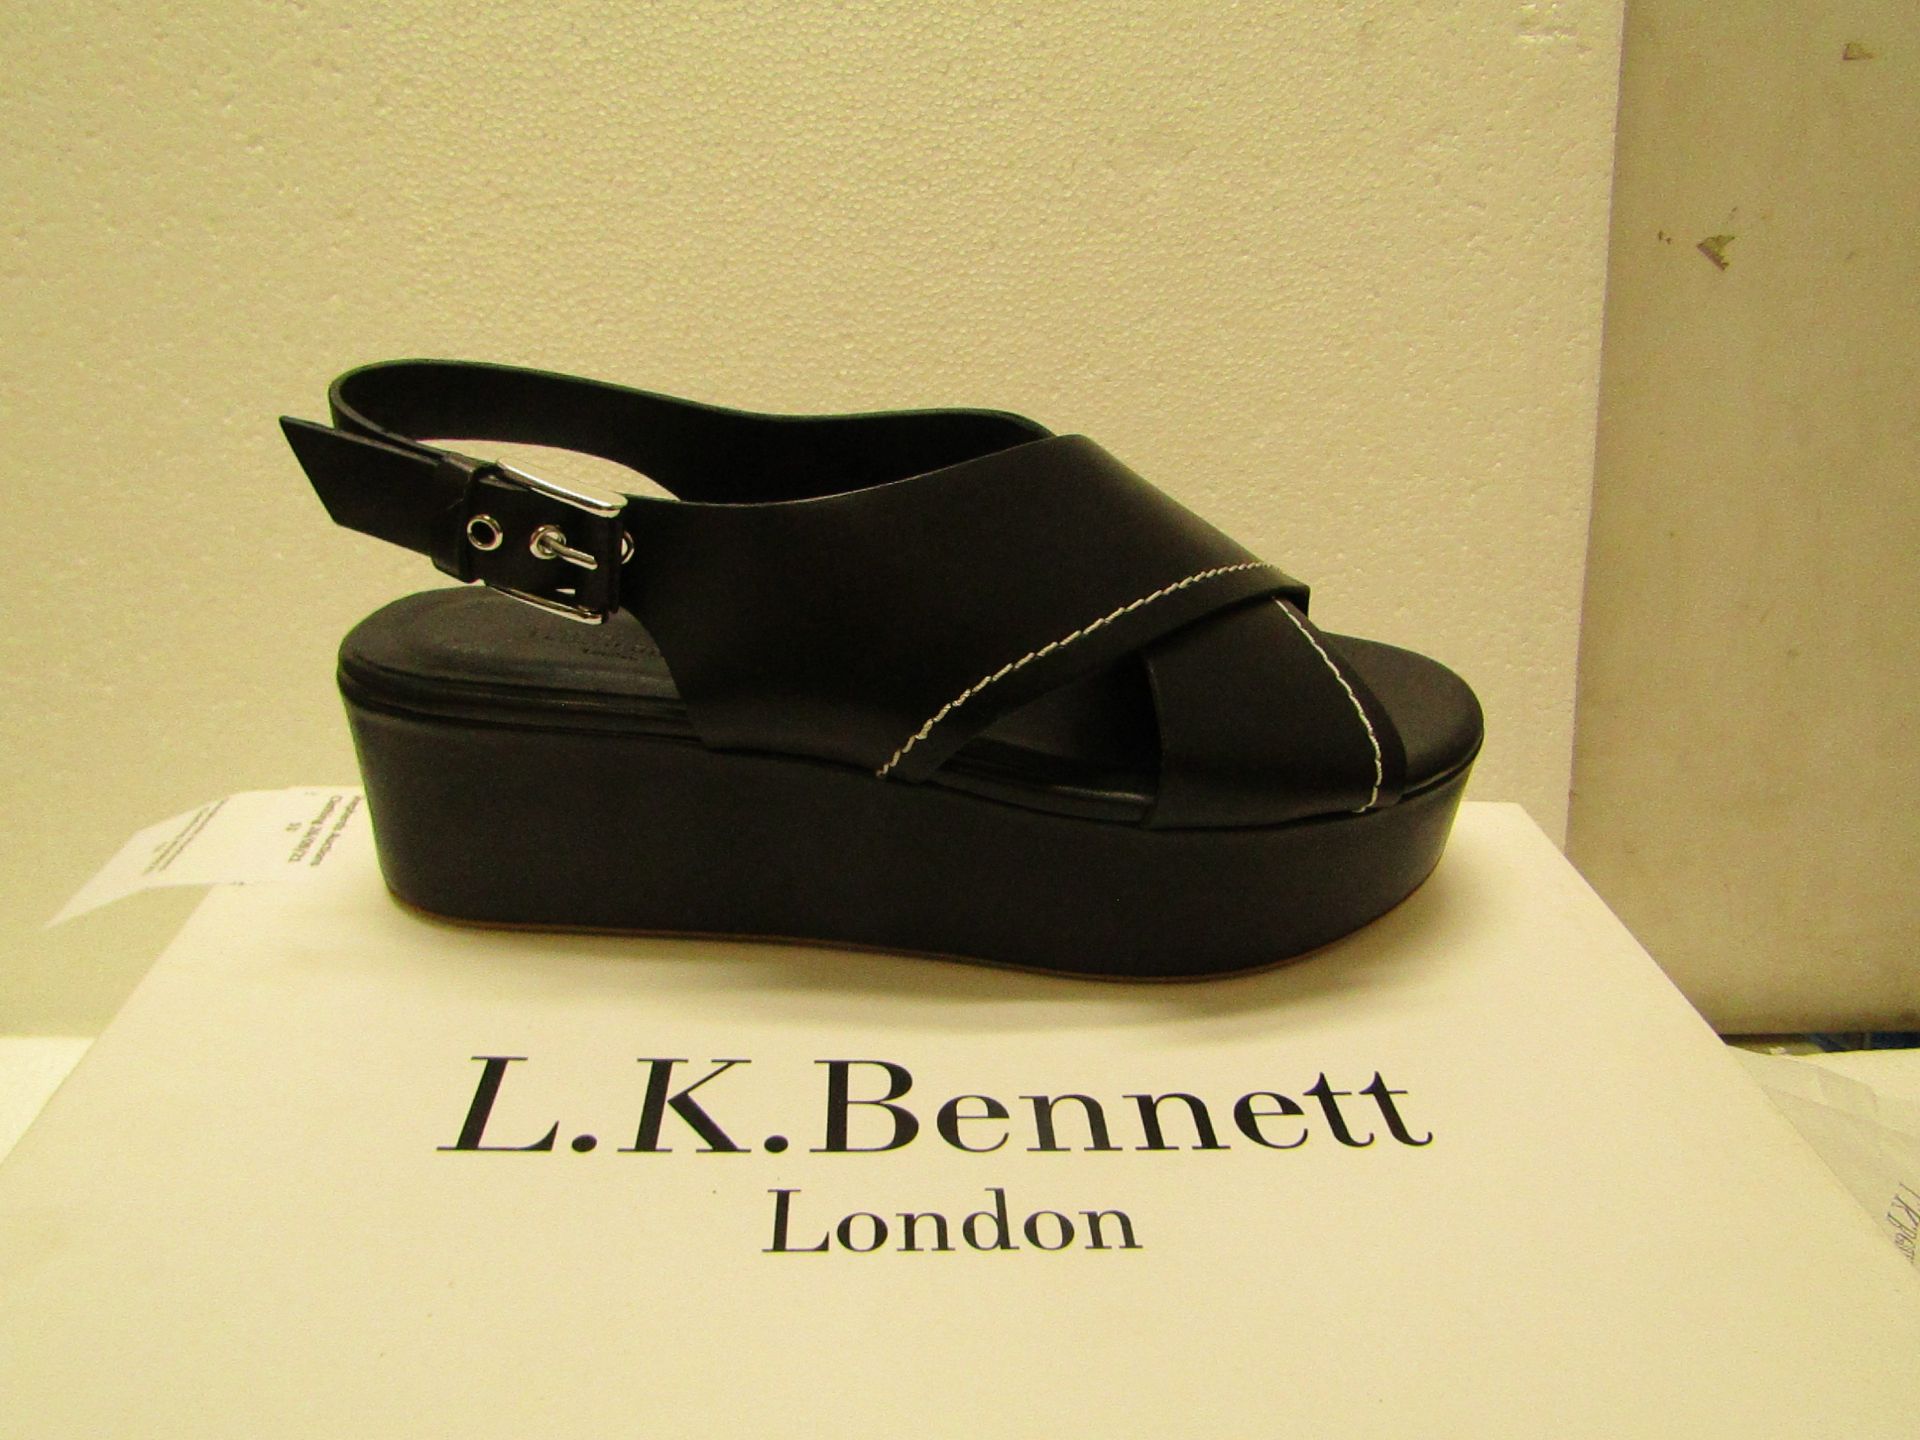 L K Bennett London Sima Black Veg Leather Shoes size 38 RRP £250 new & boxed see image for design